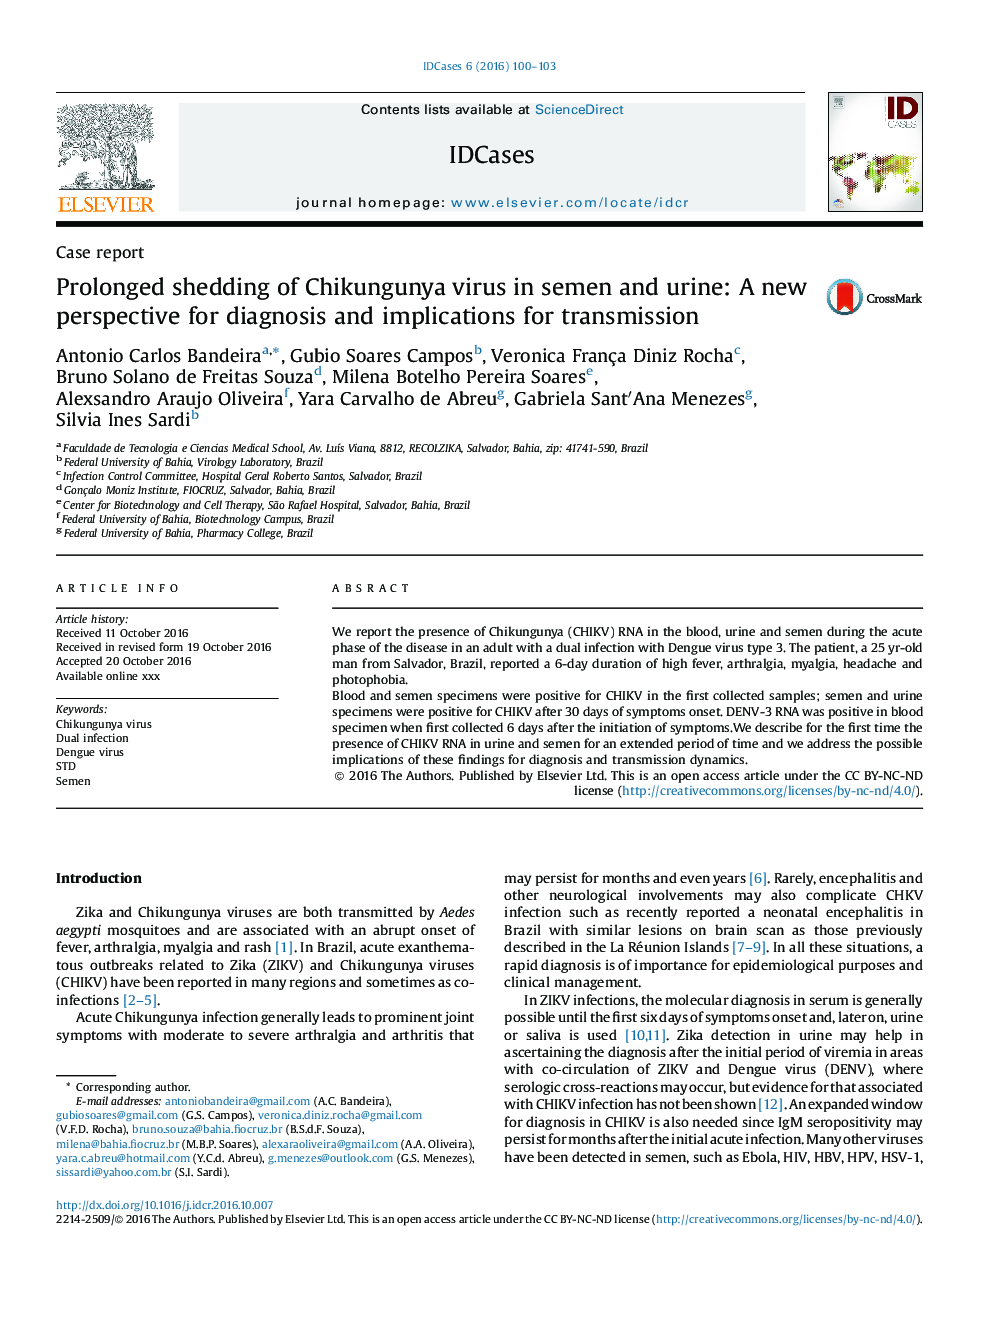 Prolonged shedding of Chikungunya virus in semen and urine: A new perspective for diagnosis and implications for transmission